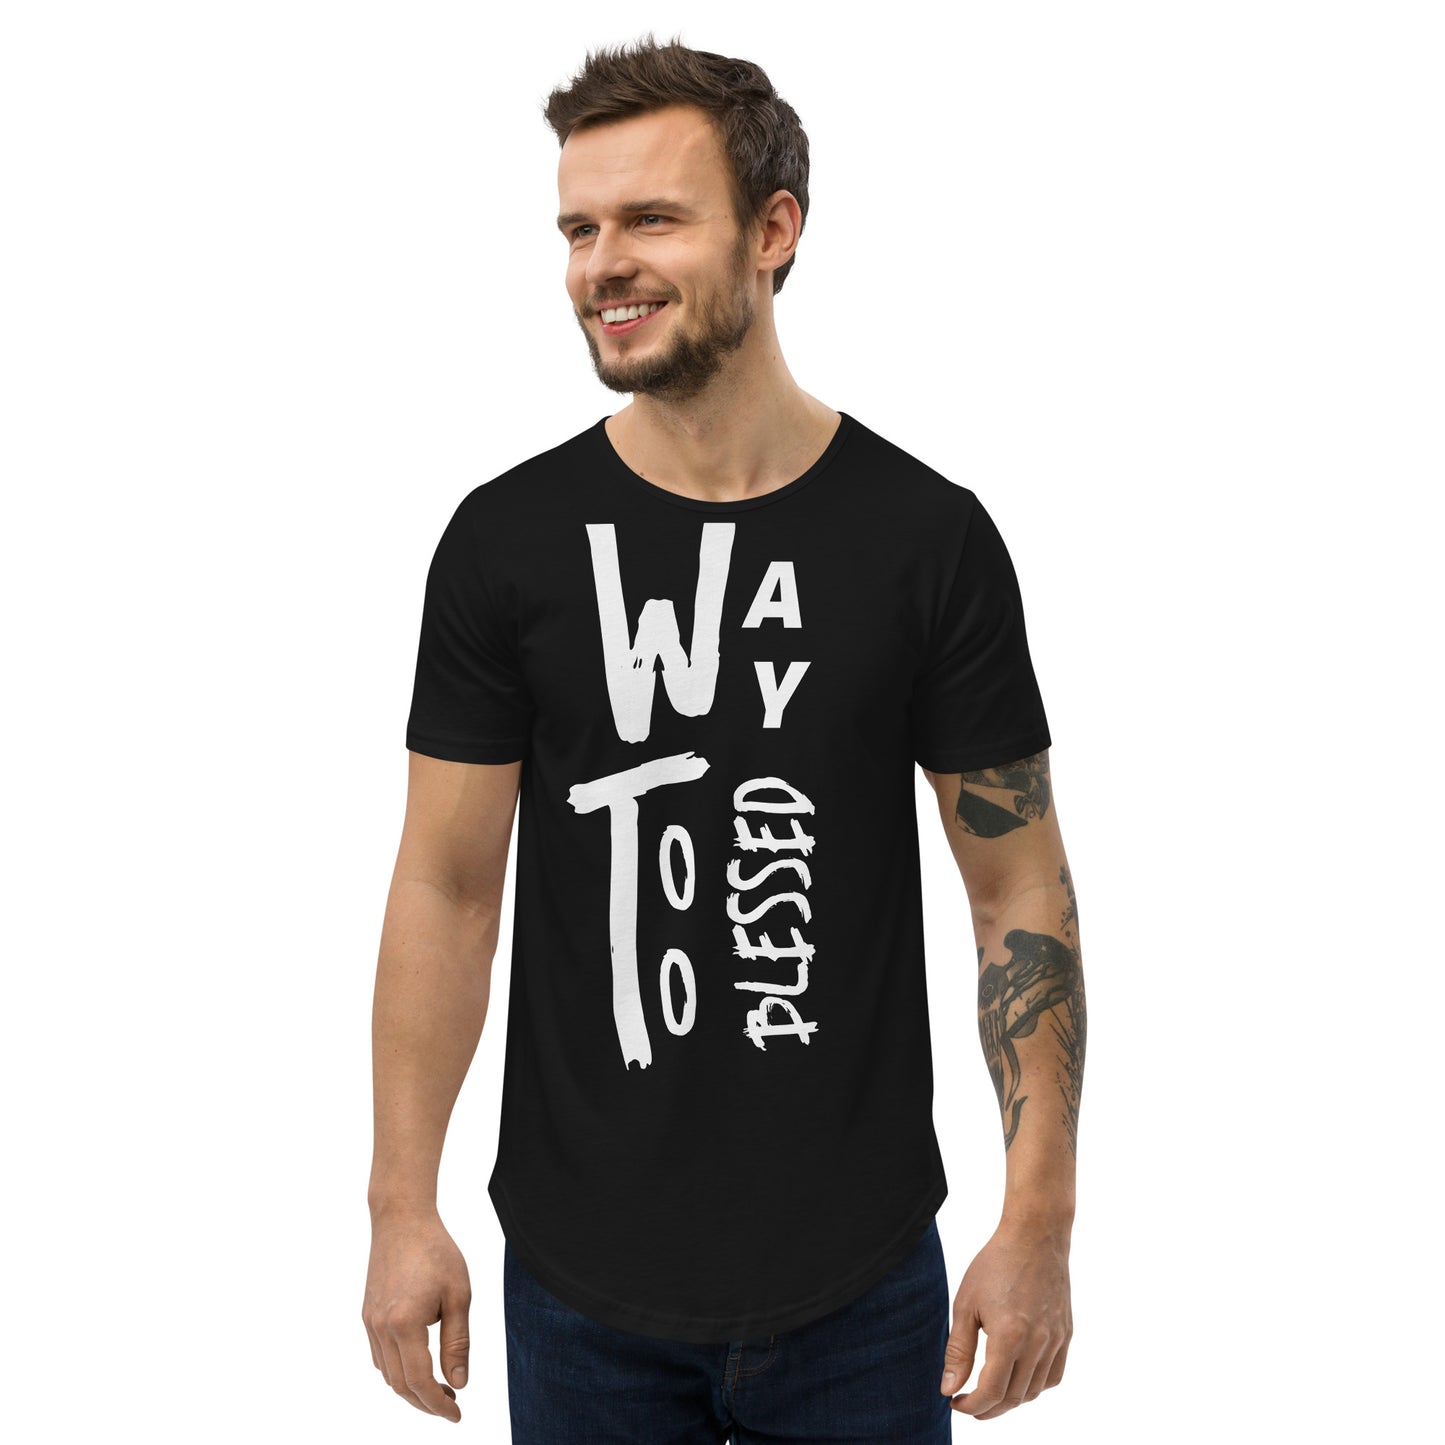 Way Too Blessed - Men's Curved Hem T-Shirt